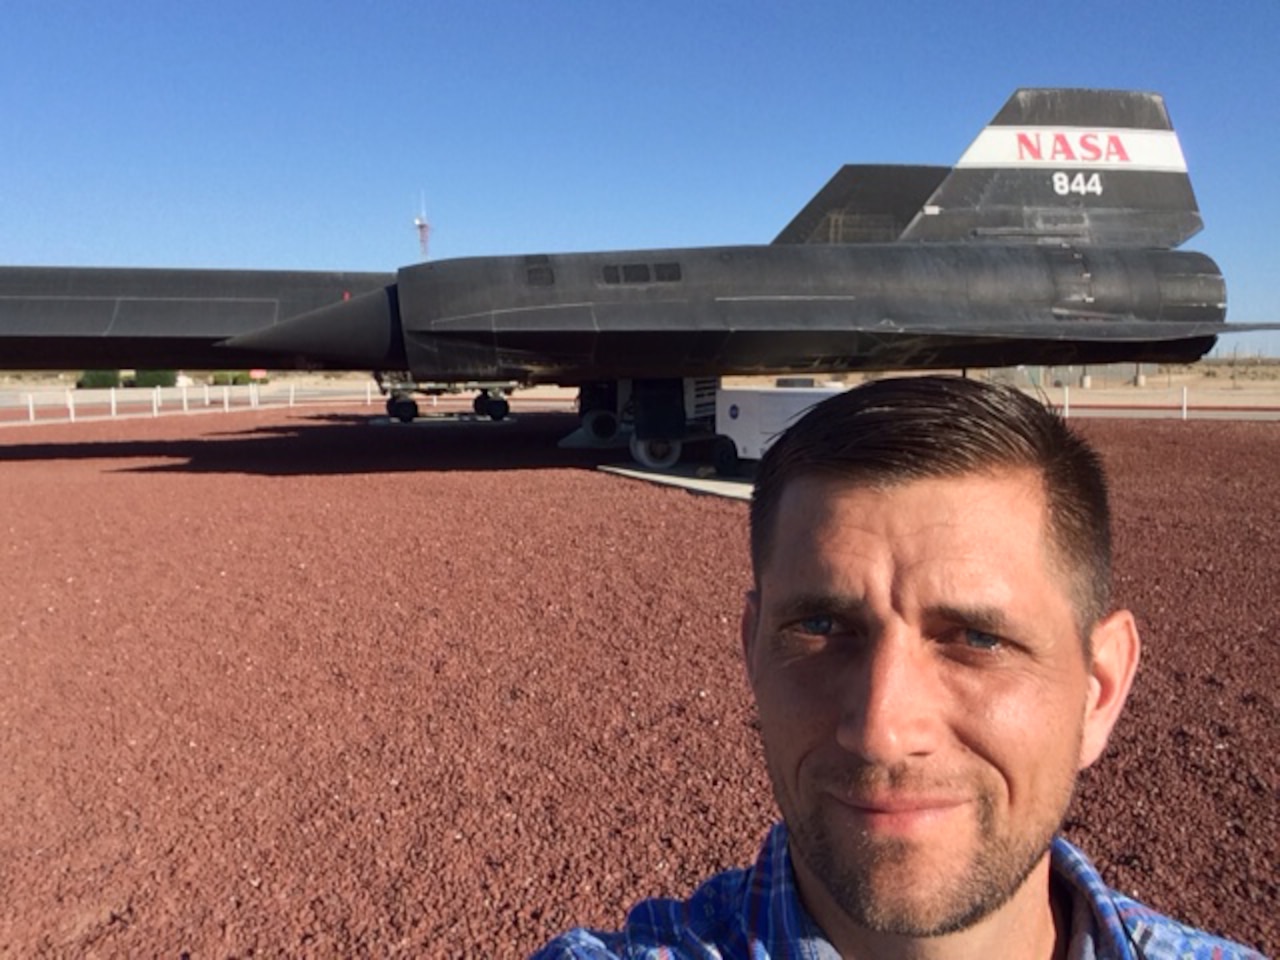 Navy Lt. Todd Coursey’s summer will be spent at NASA’s Armstrong Flight Research Center in Edwards, Calif., where he is participating in a rare directed-study internship with the space organization. Navy photo by Lt. Todd Coursey